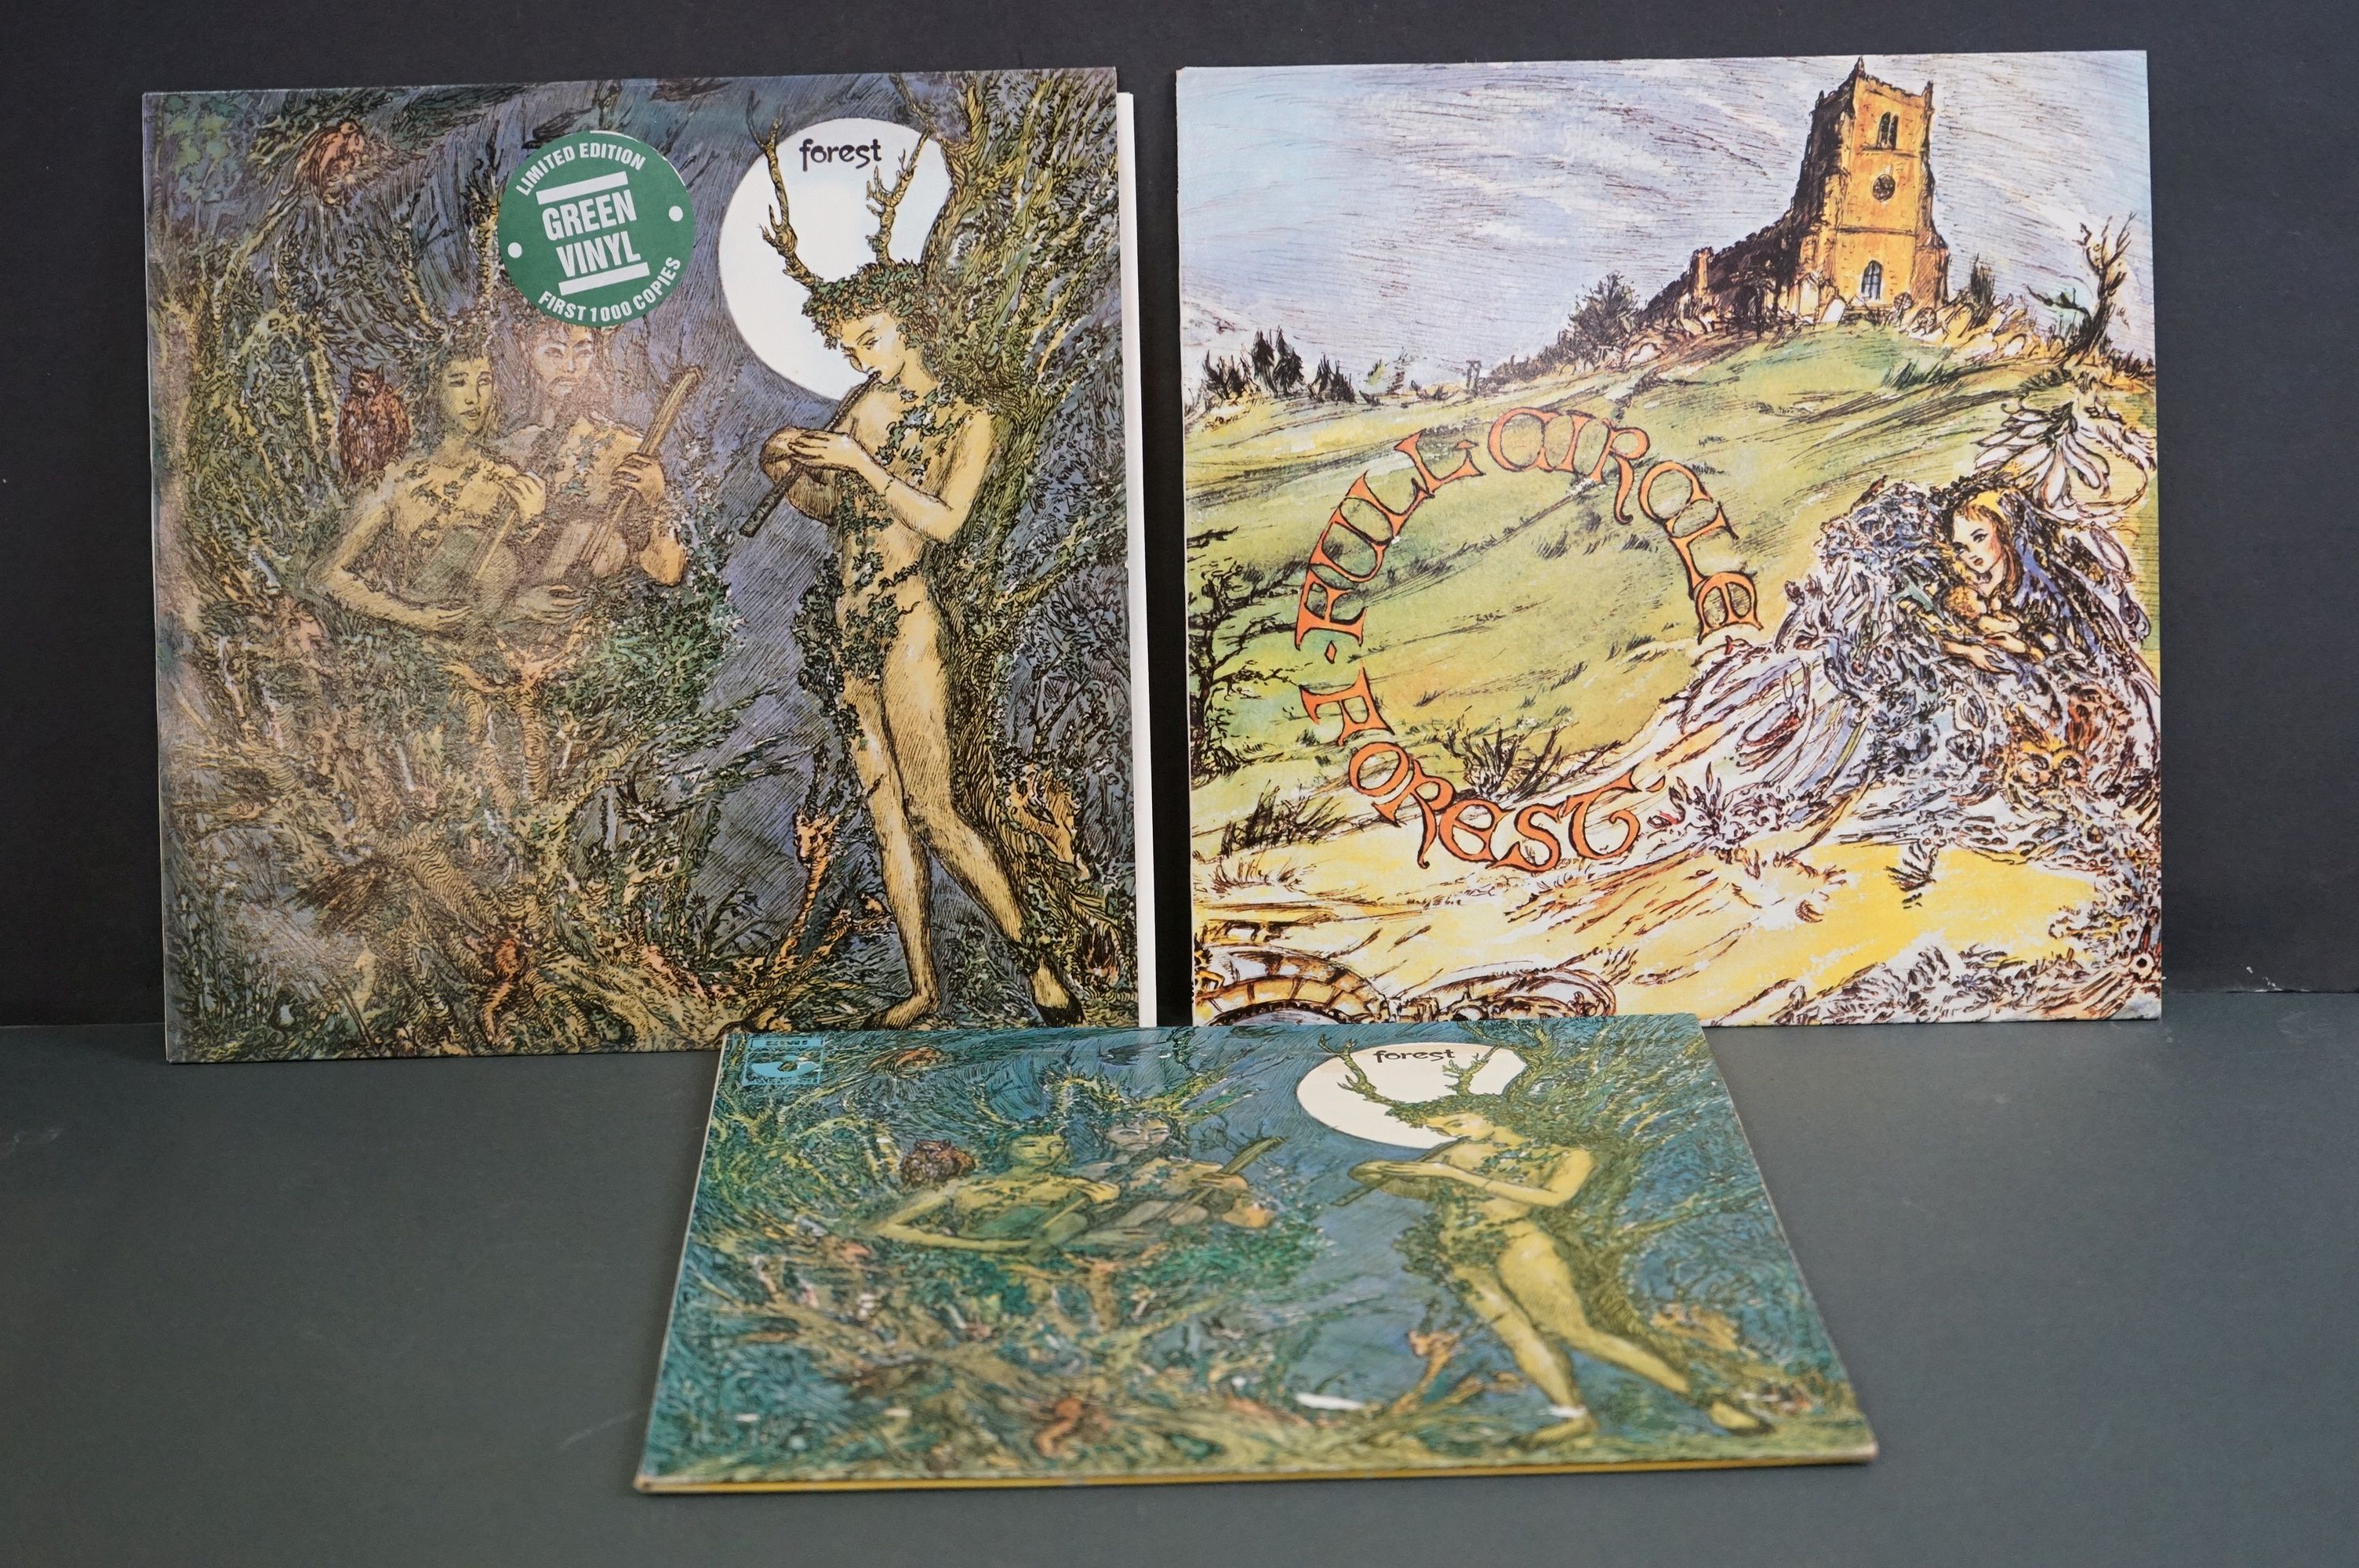 Vinyl - Three Forest LPs to include self titled on Harvest SHVL760 no EMI on label, tape removal